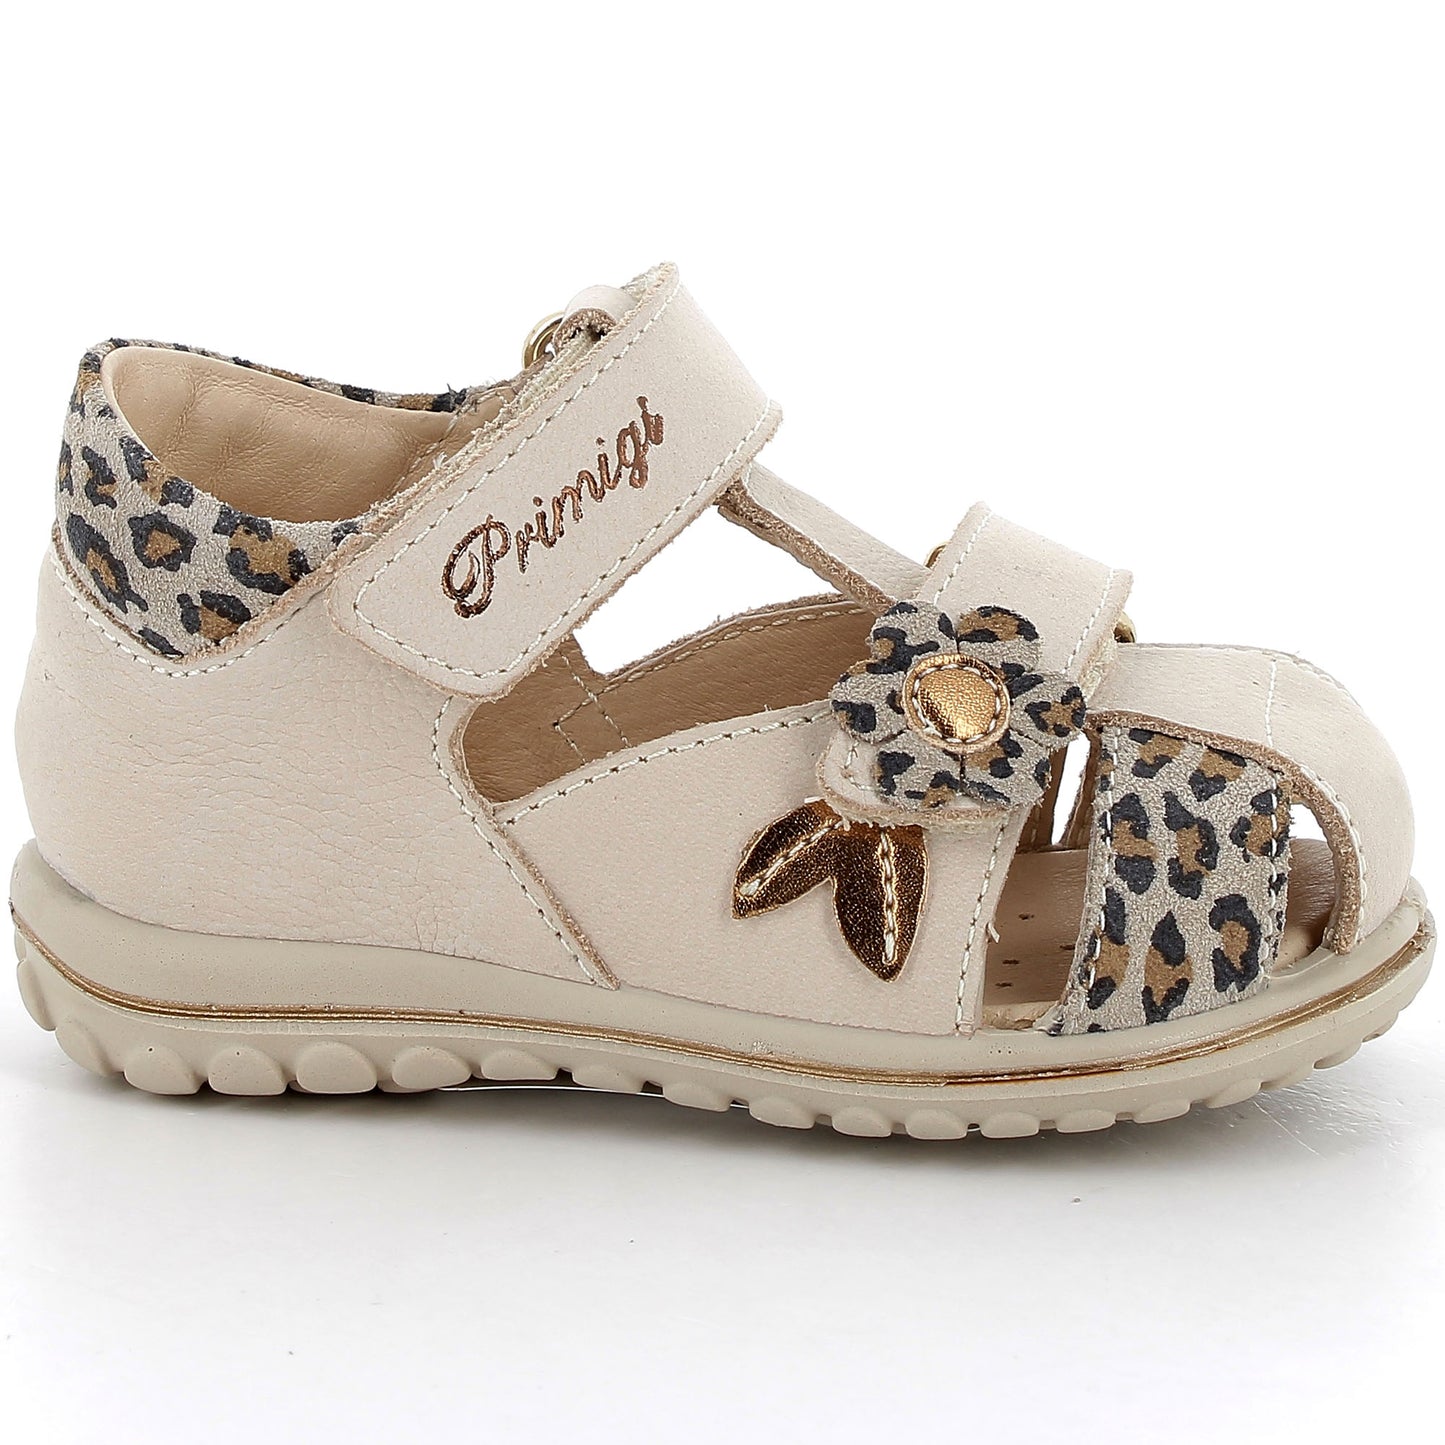 PRIMIGI Halbsandale BABY SWEET 58626-33 - beige / gold - front view with adjustable straps and comfortable sole 